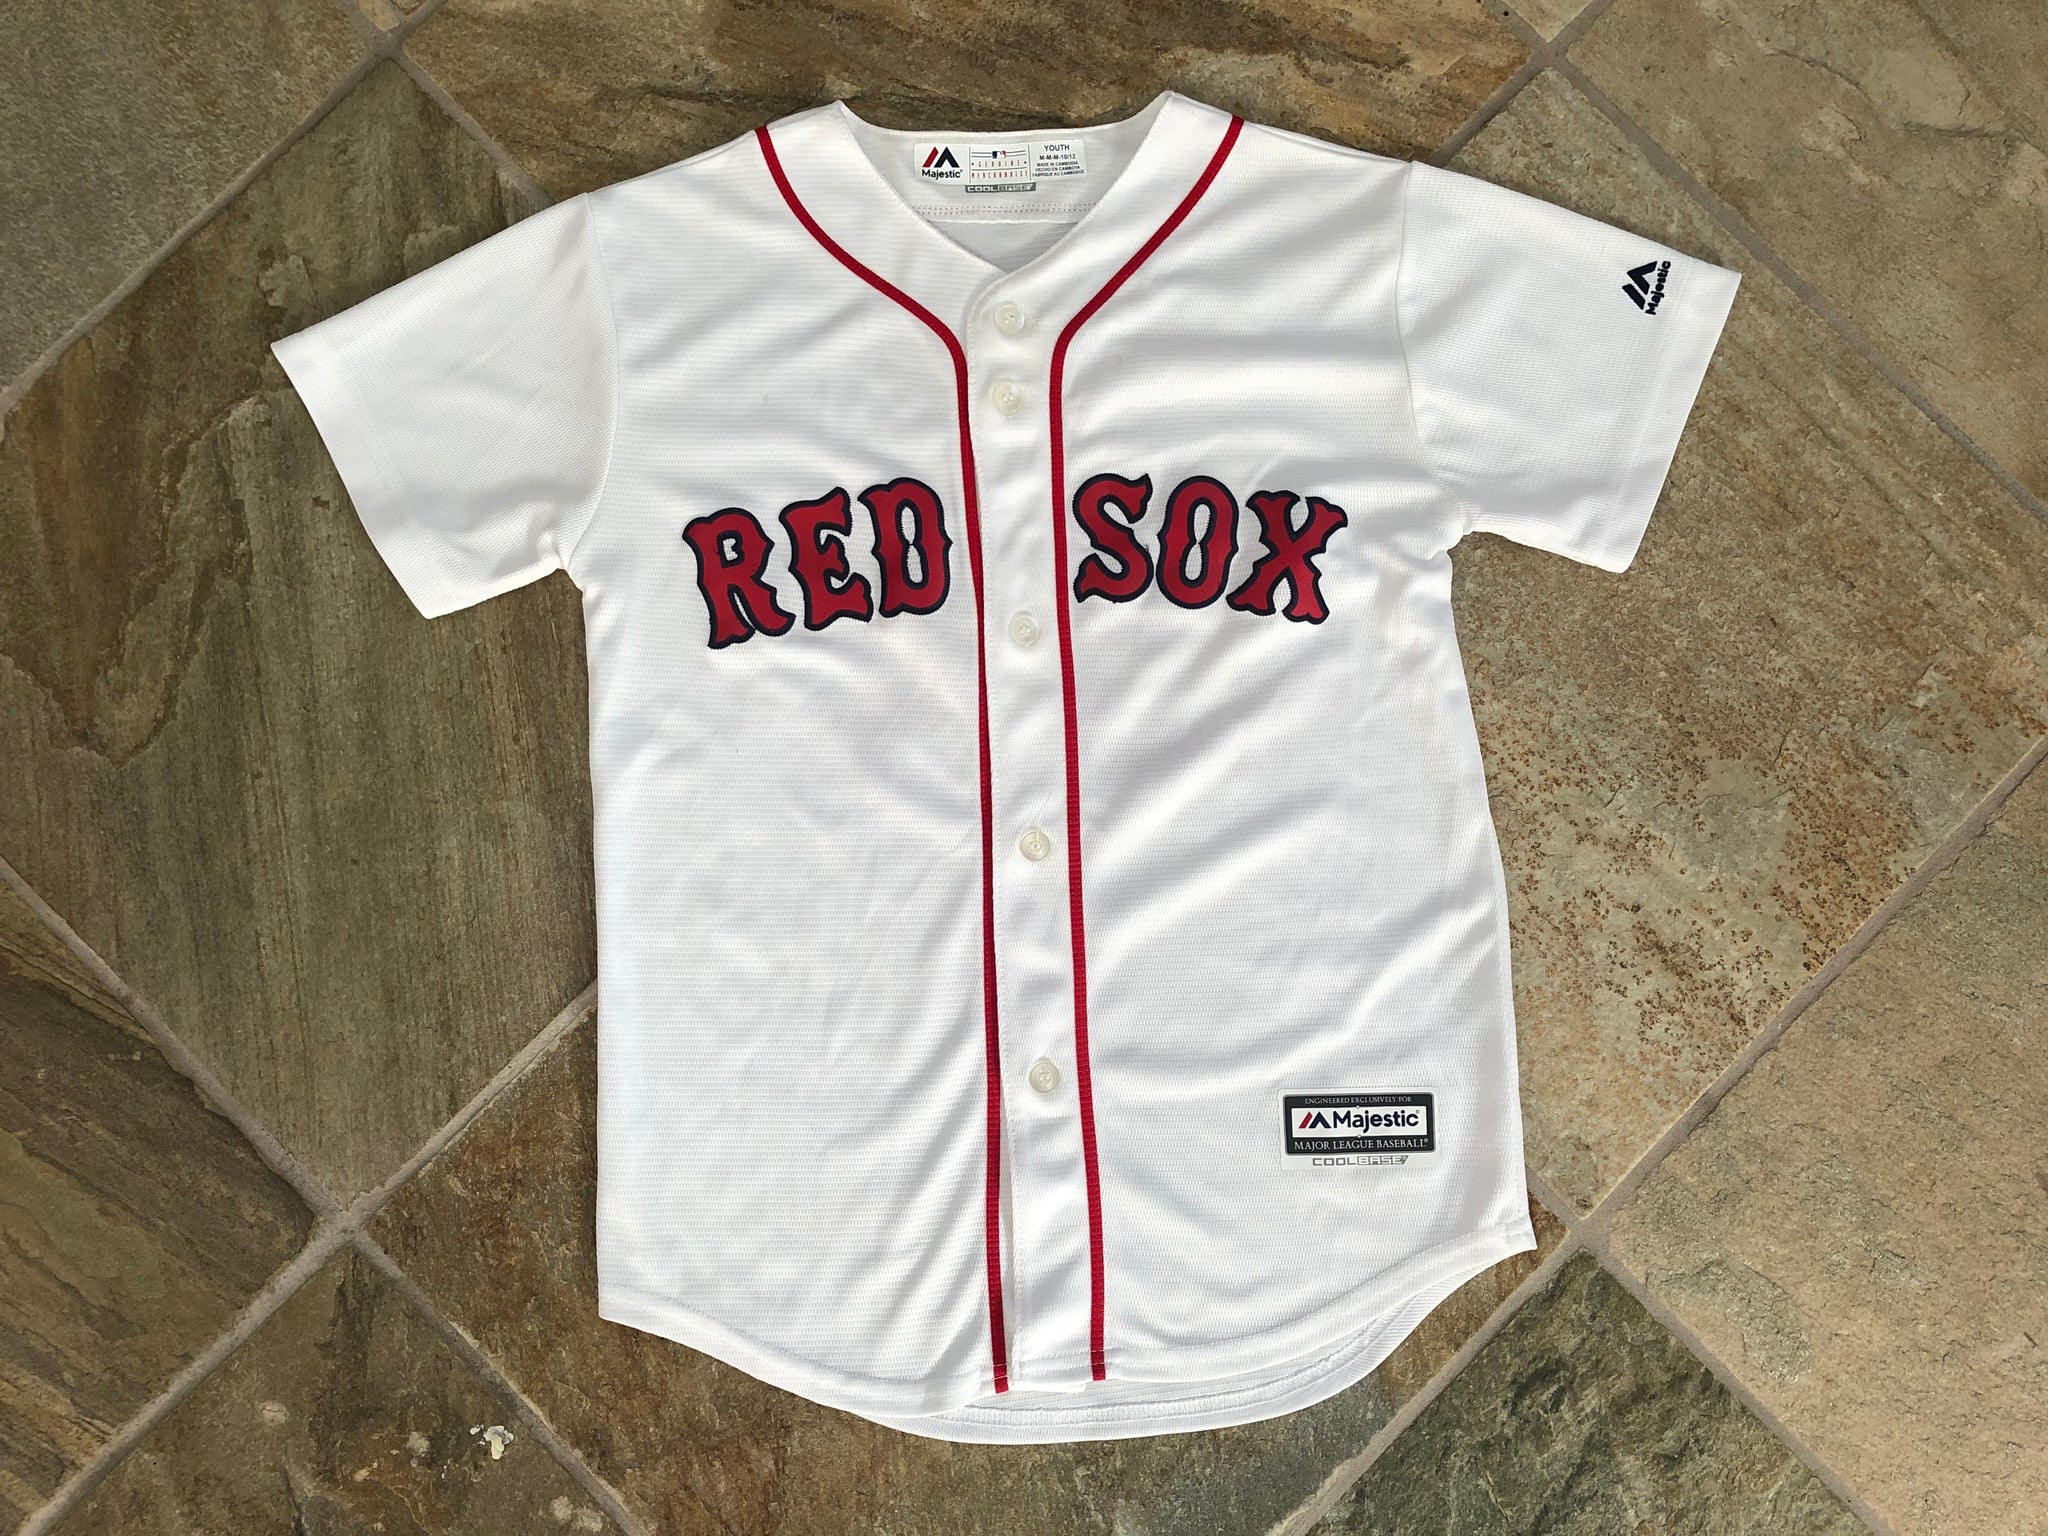 David Ortiz official youth Red Sox home jersey